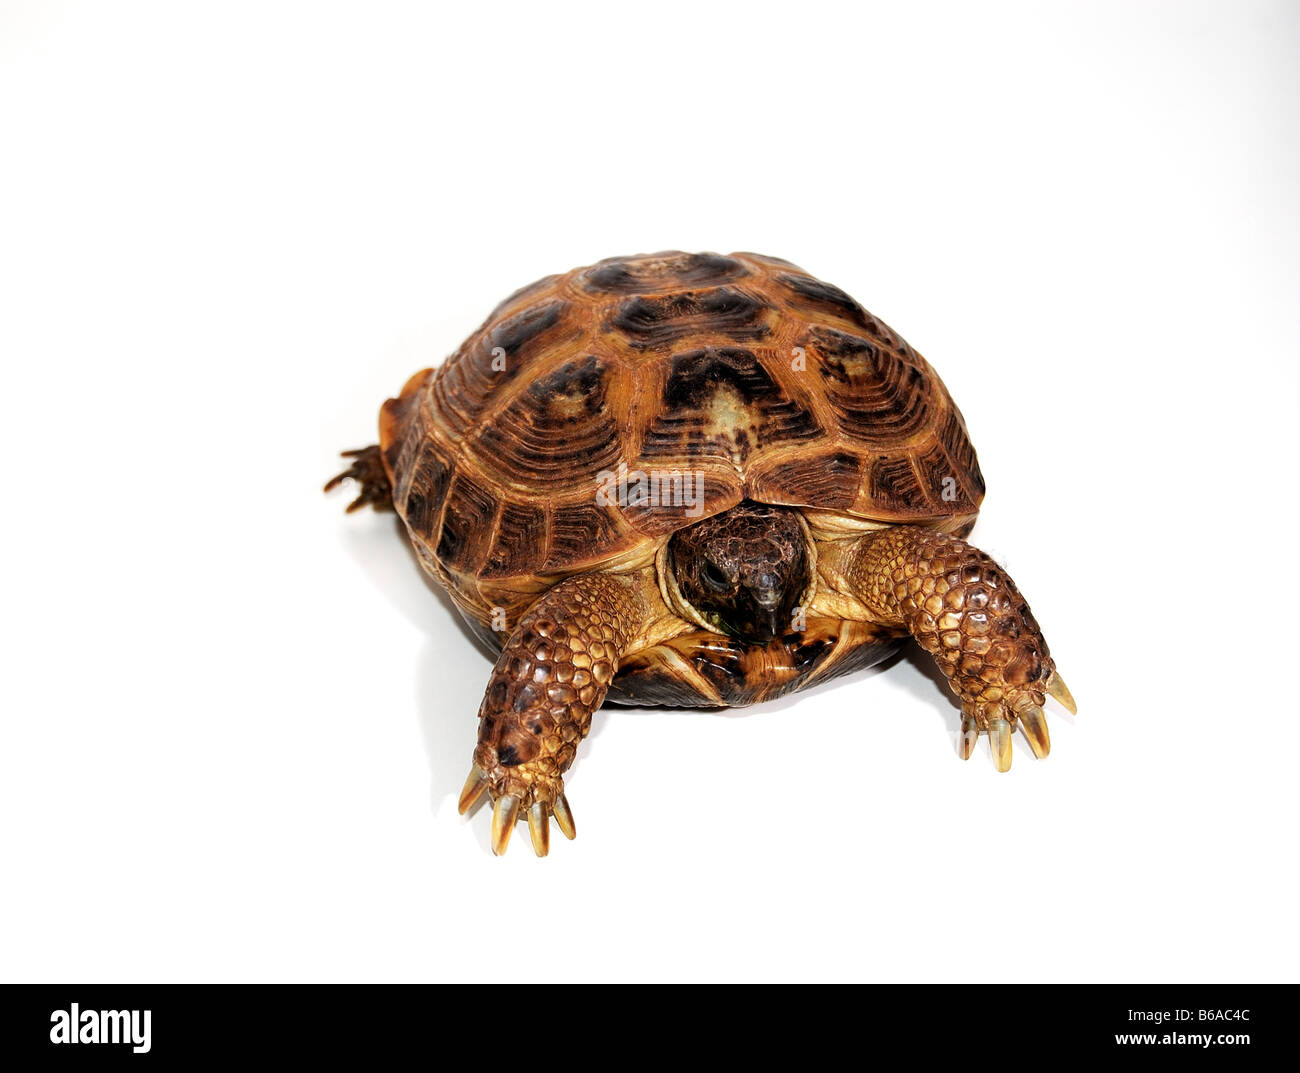 Isolated image of a Russian Tortoise on a white background with space for copy. Stock Photo